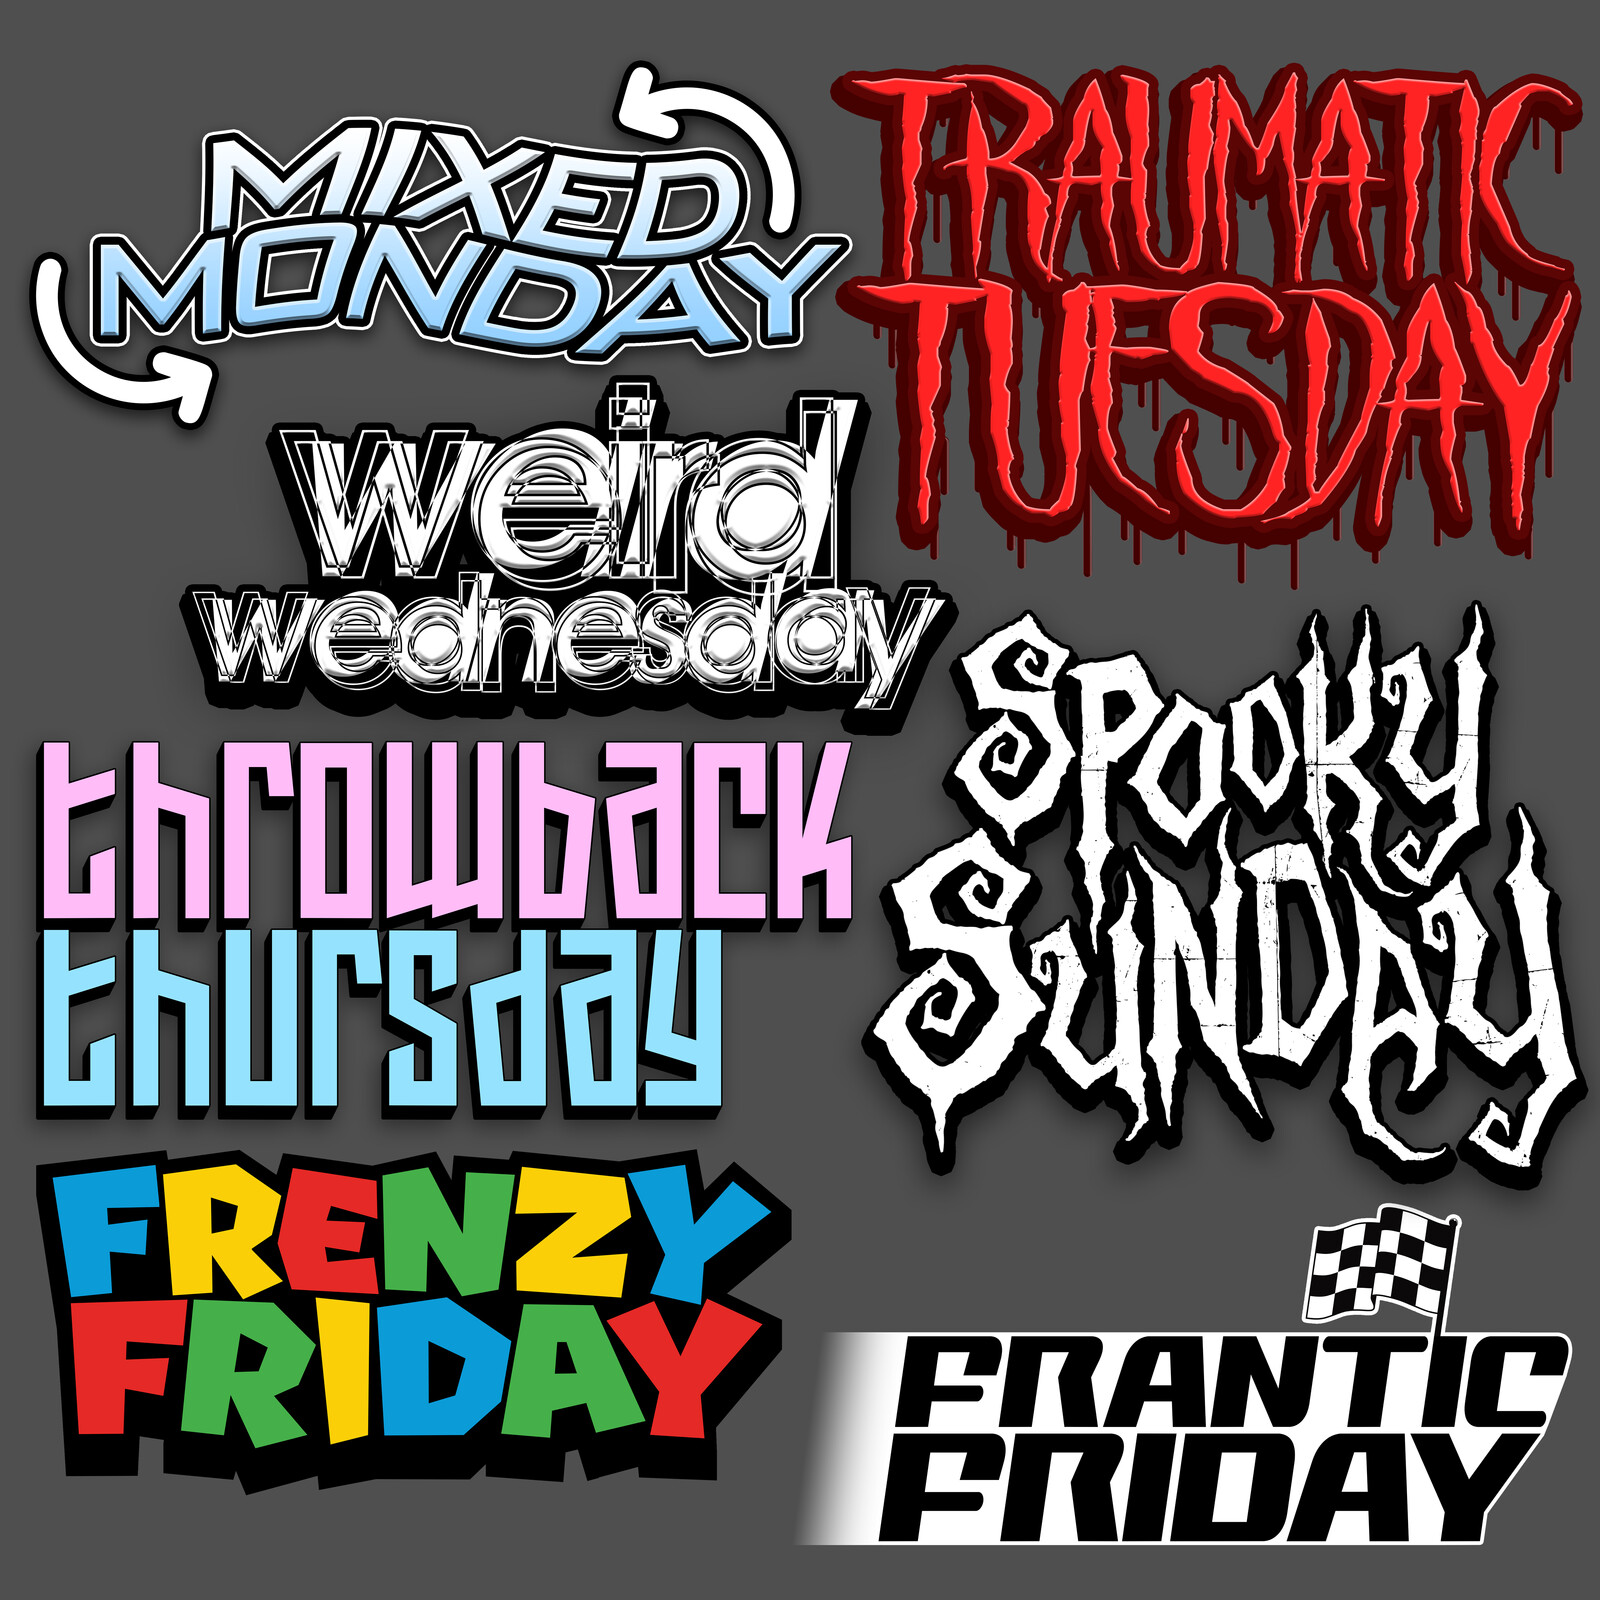 the commissioner didn't like the 'frantic friday' logo, so it was replaced by 'frenzy friday'. i'm still very proud of the original, so i included it here anyway.